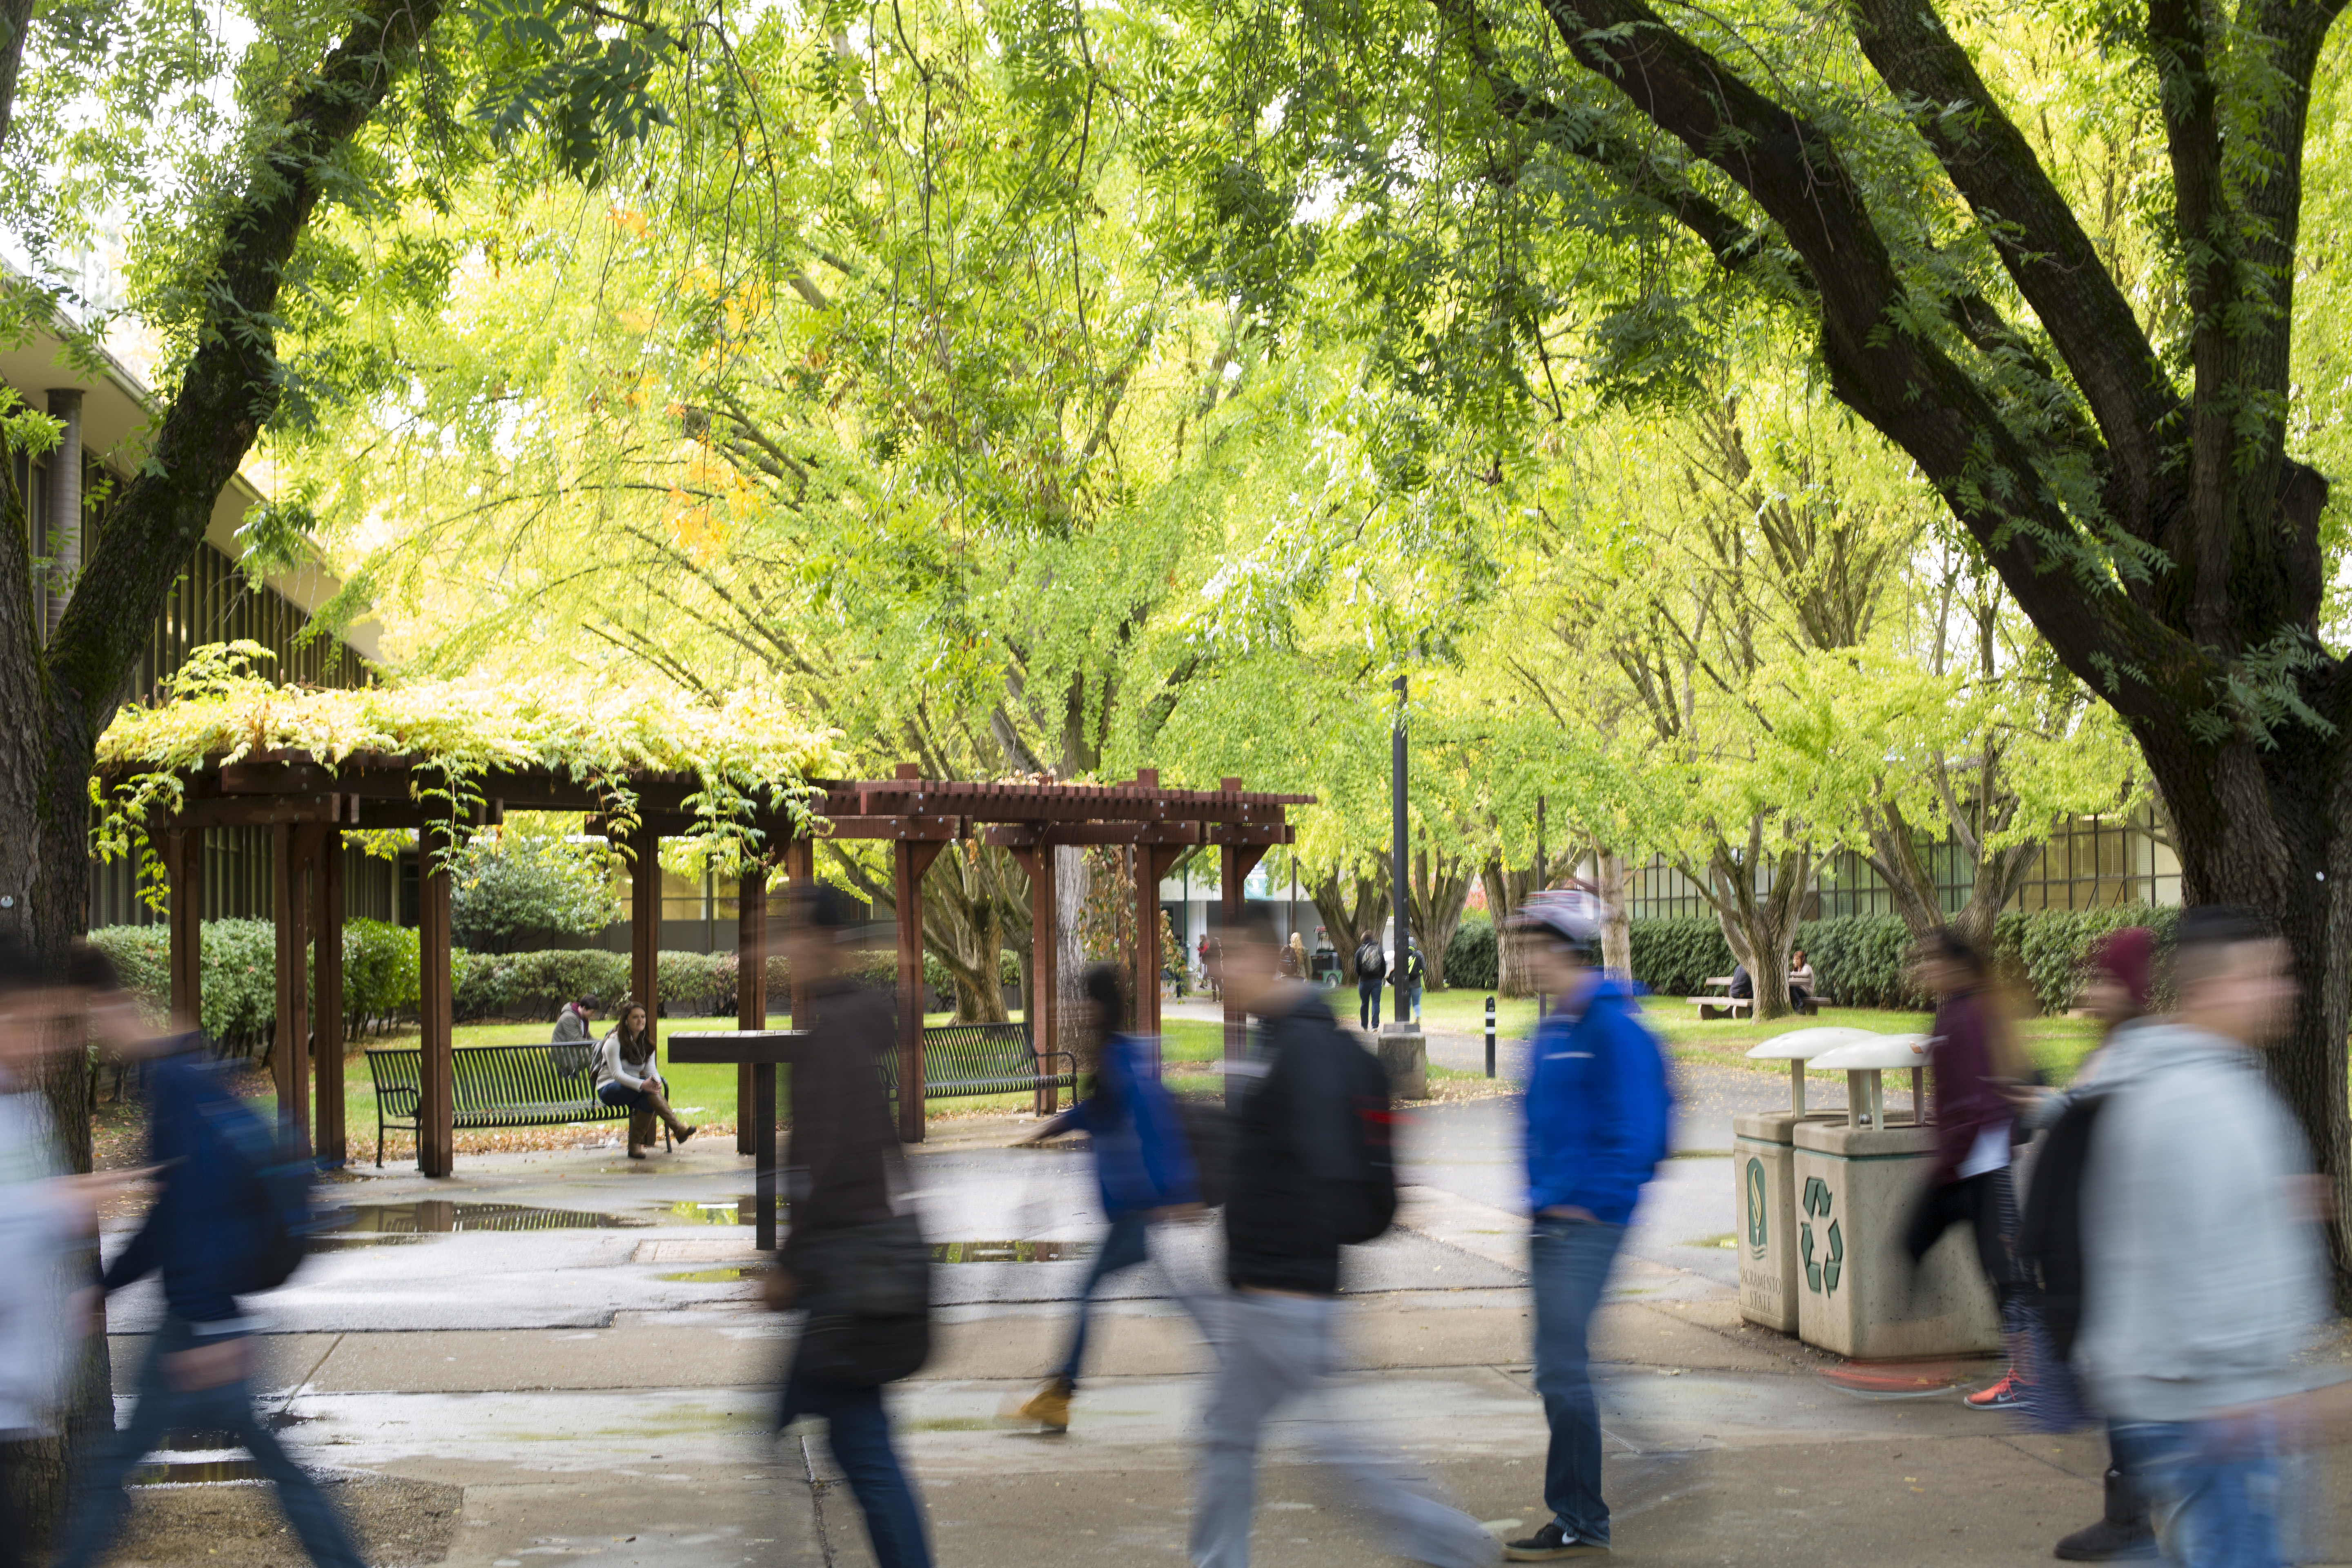 An image on people walking on a college campus where the background is clear and the people are blurry from walking.